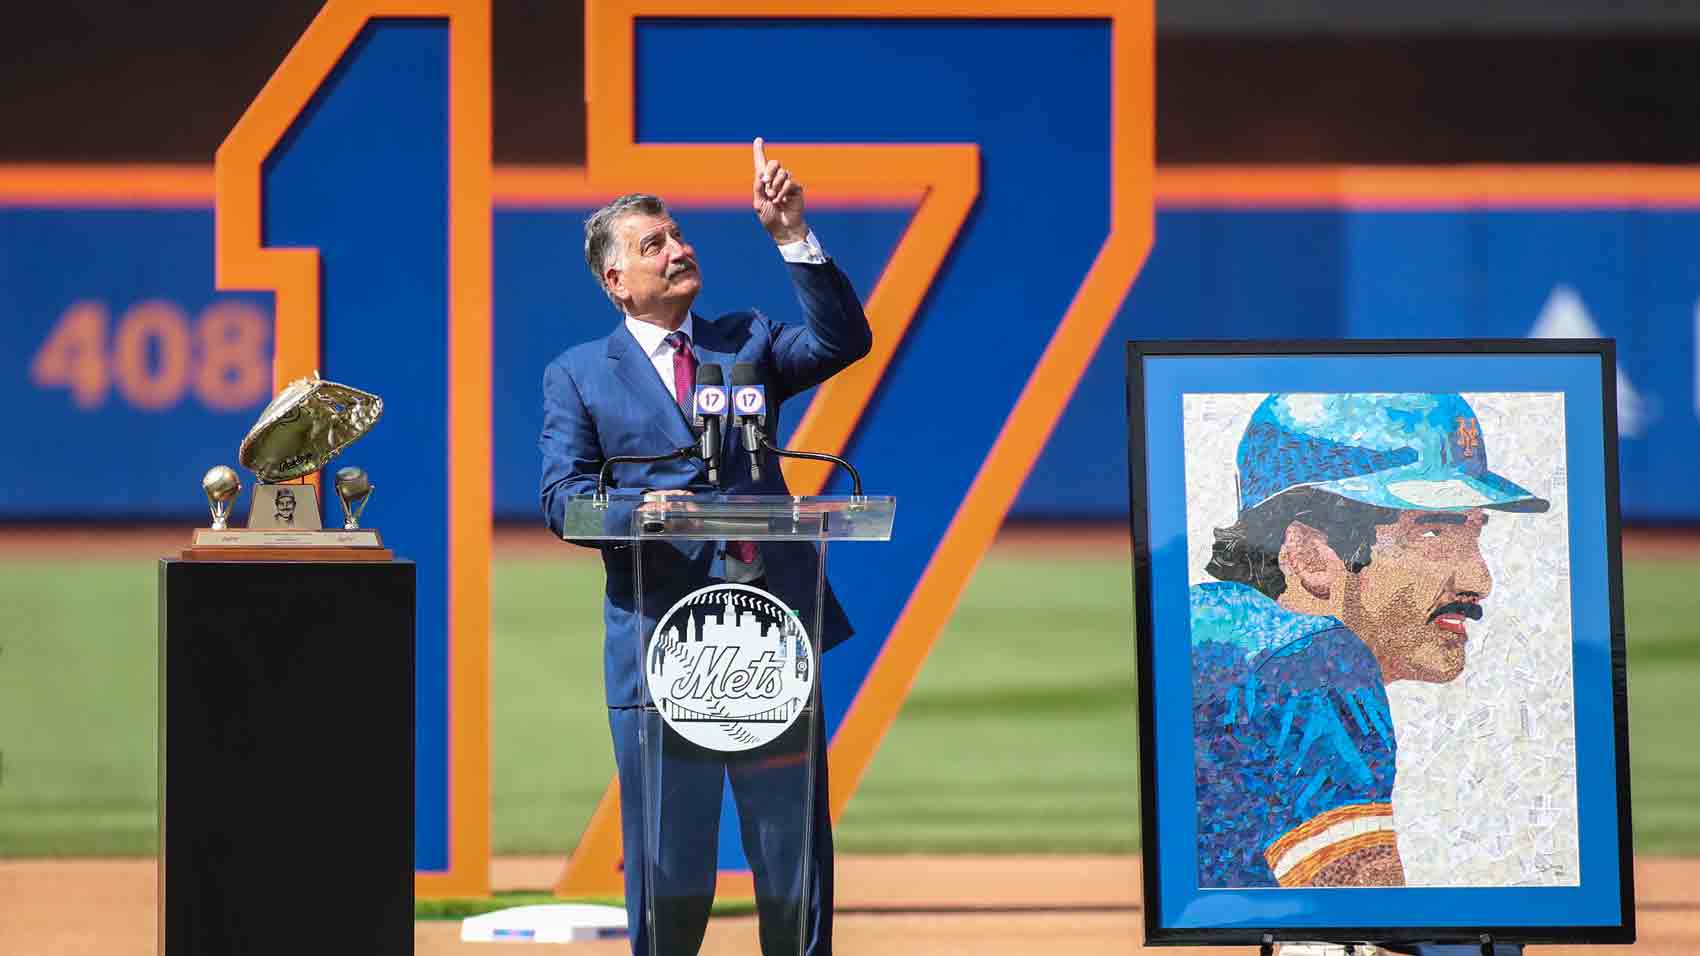 Former 1B Keith Hernandez cherishes 'a great moment,' as New York Mets  retire No. 17 jersey - ESPN